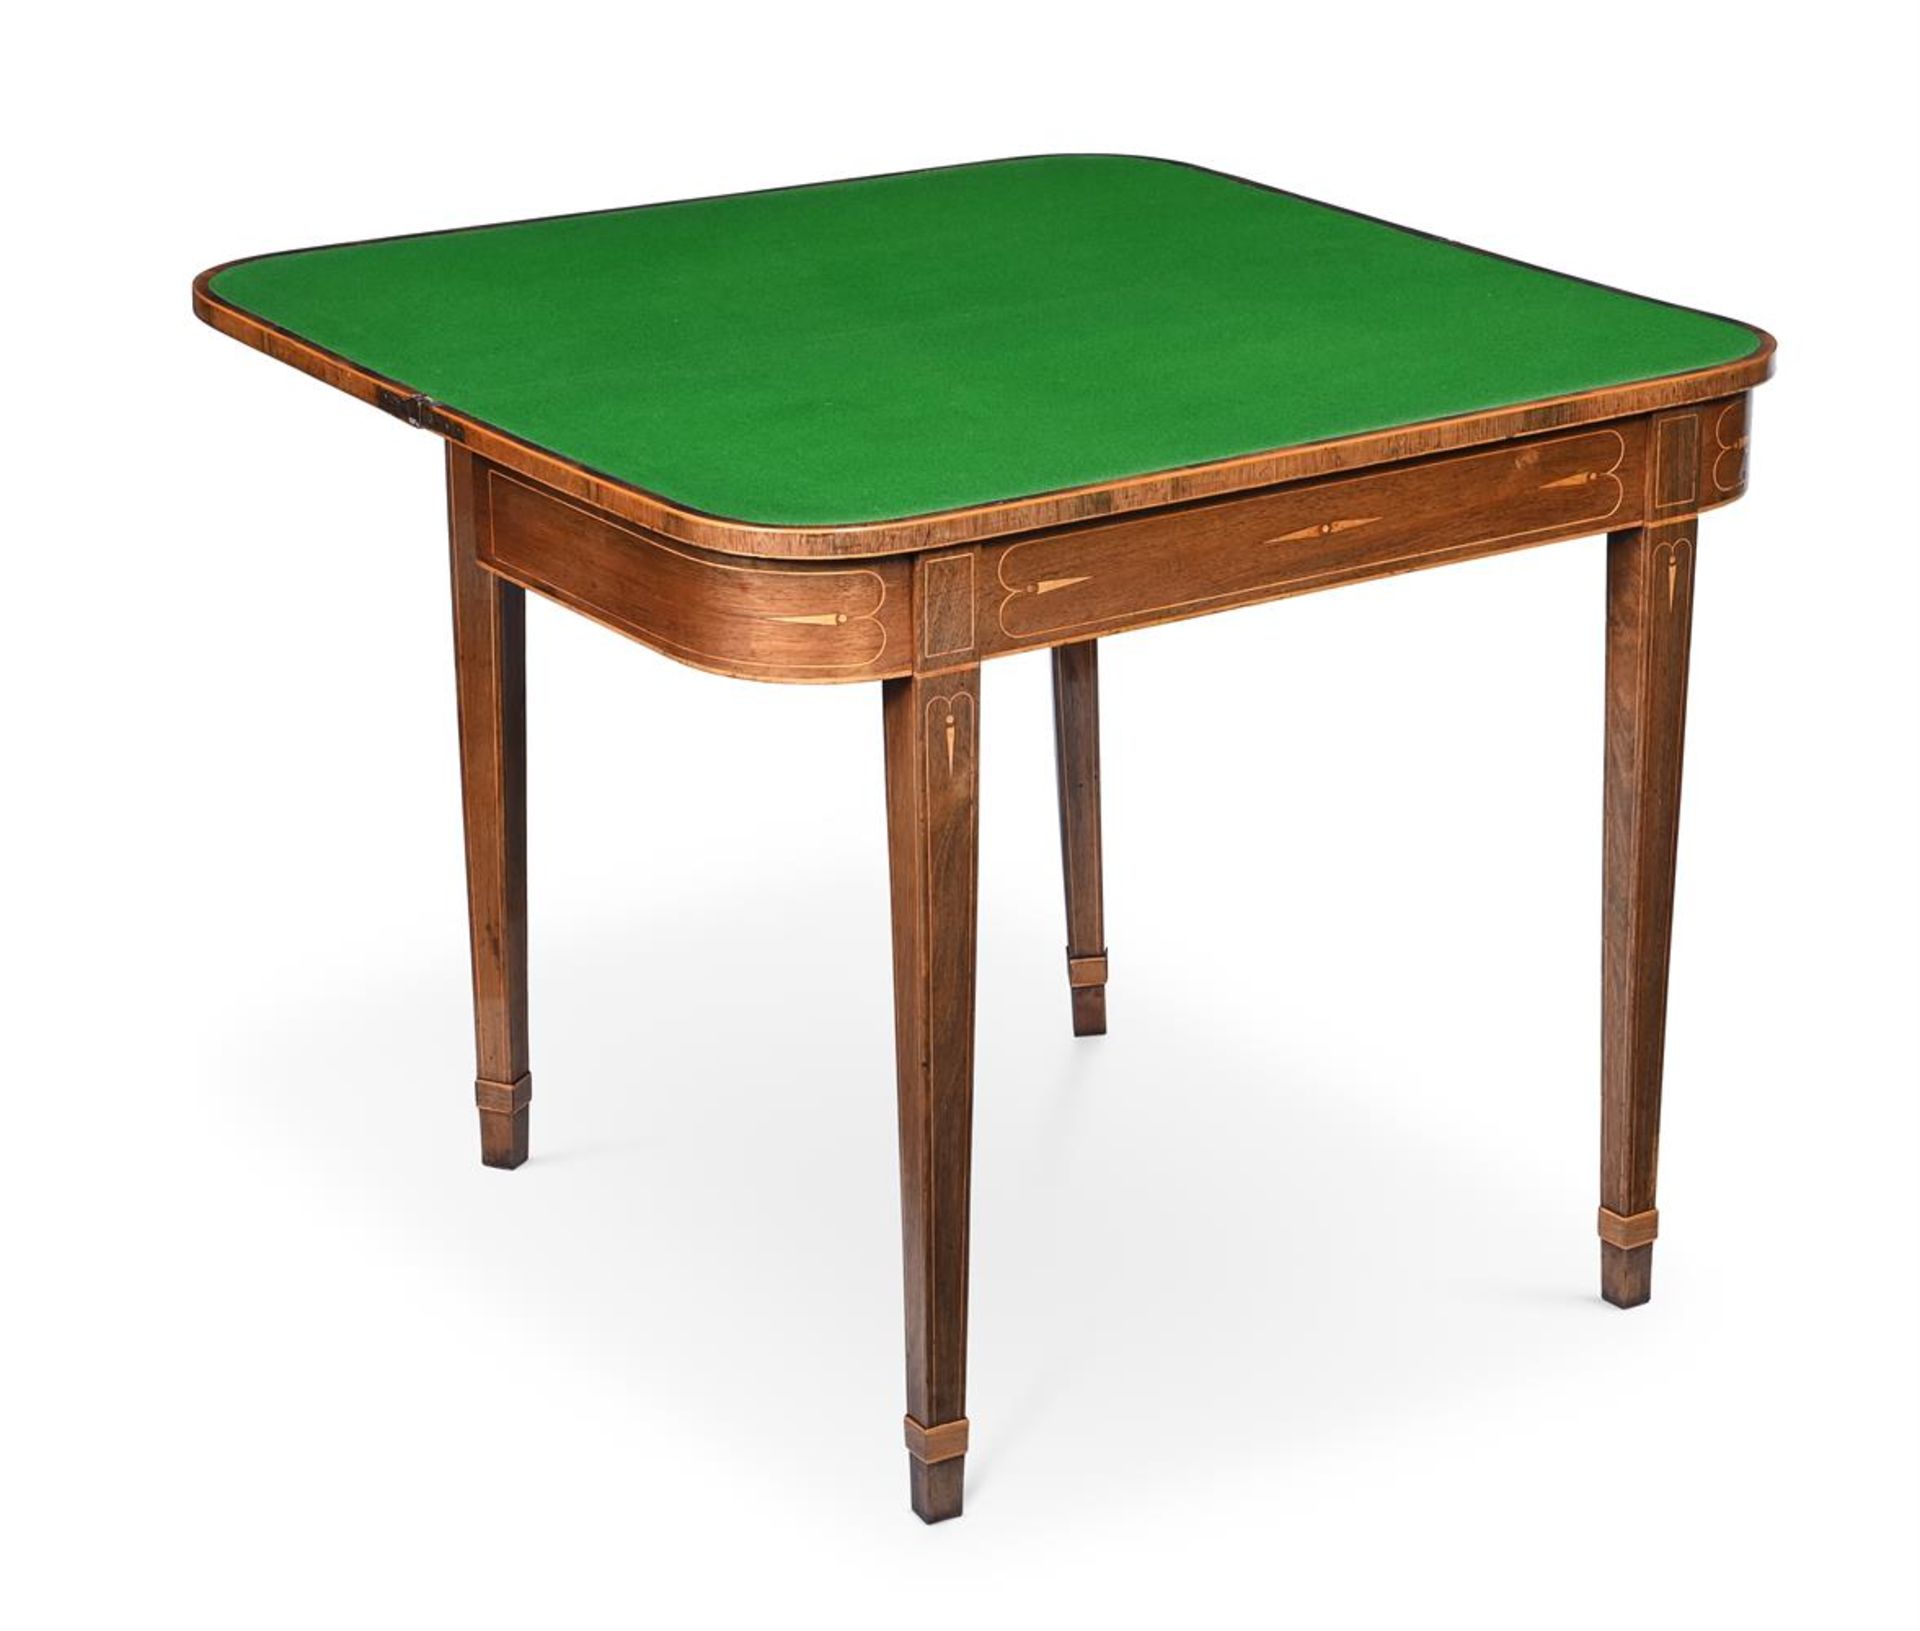 Y A PAIR OF GEORGE III ROSEWOOD AND SATINWOOD CROSSBANDED CARD TABLES, CIRCA 1790 - Image 6 of 8